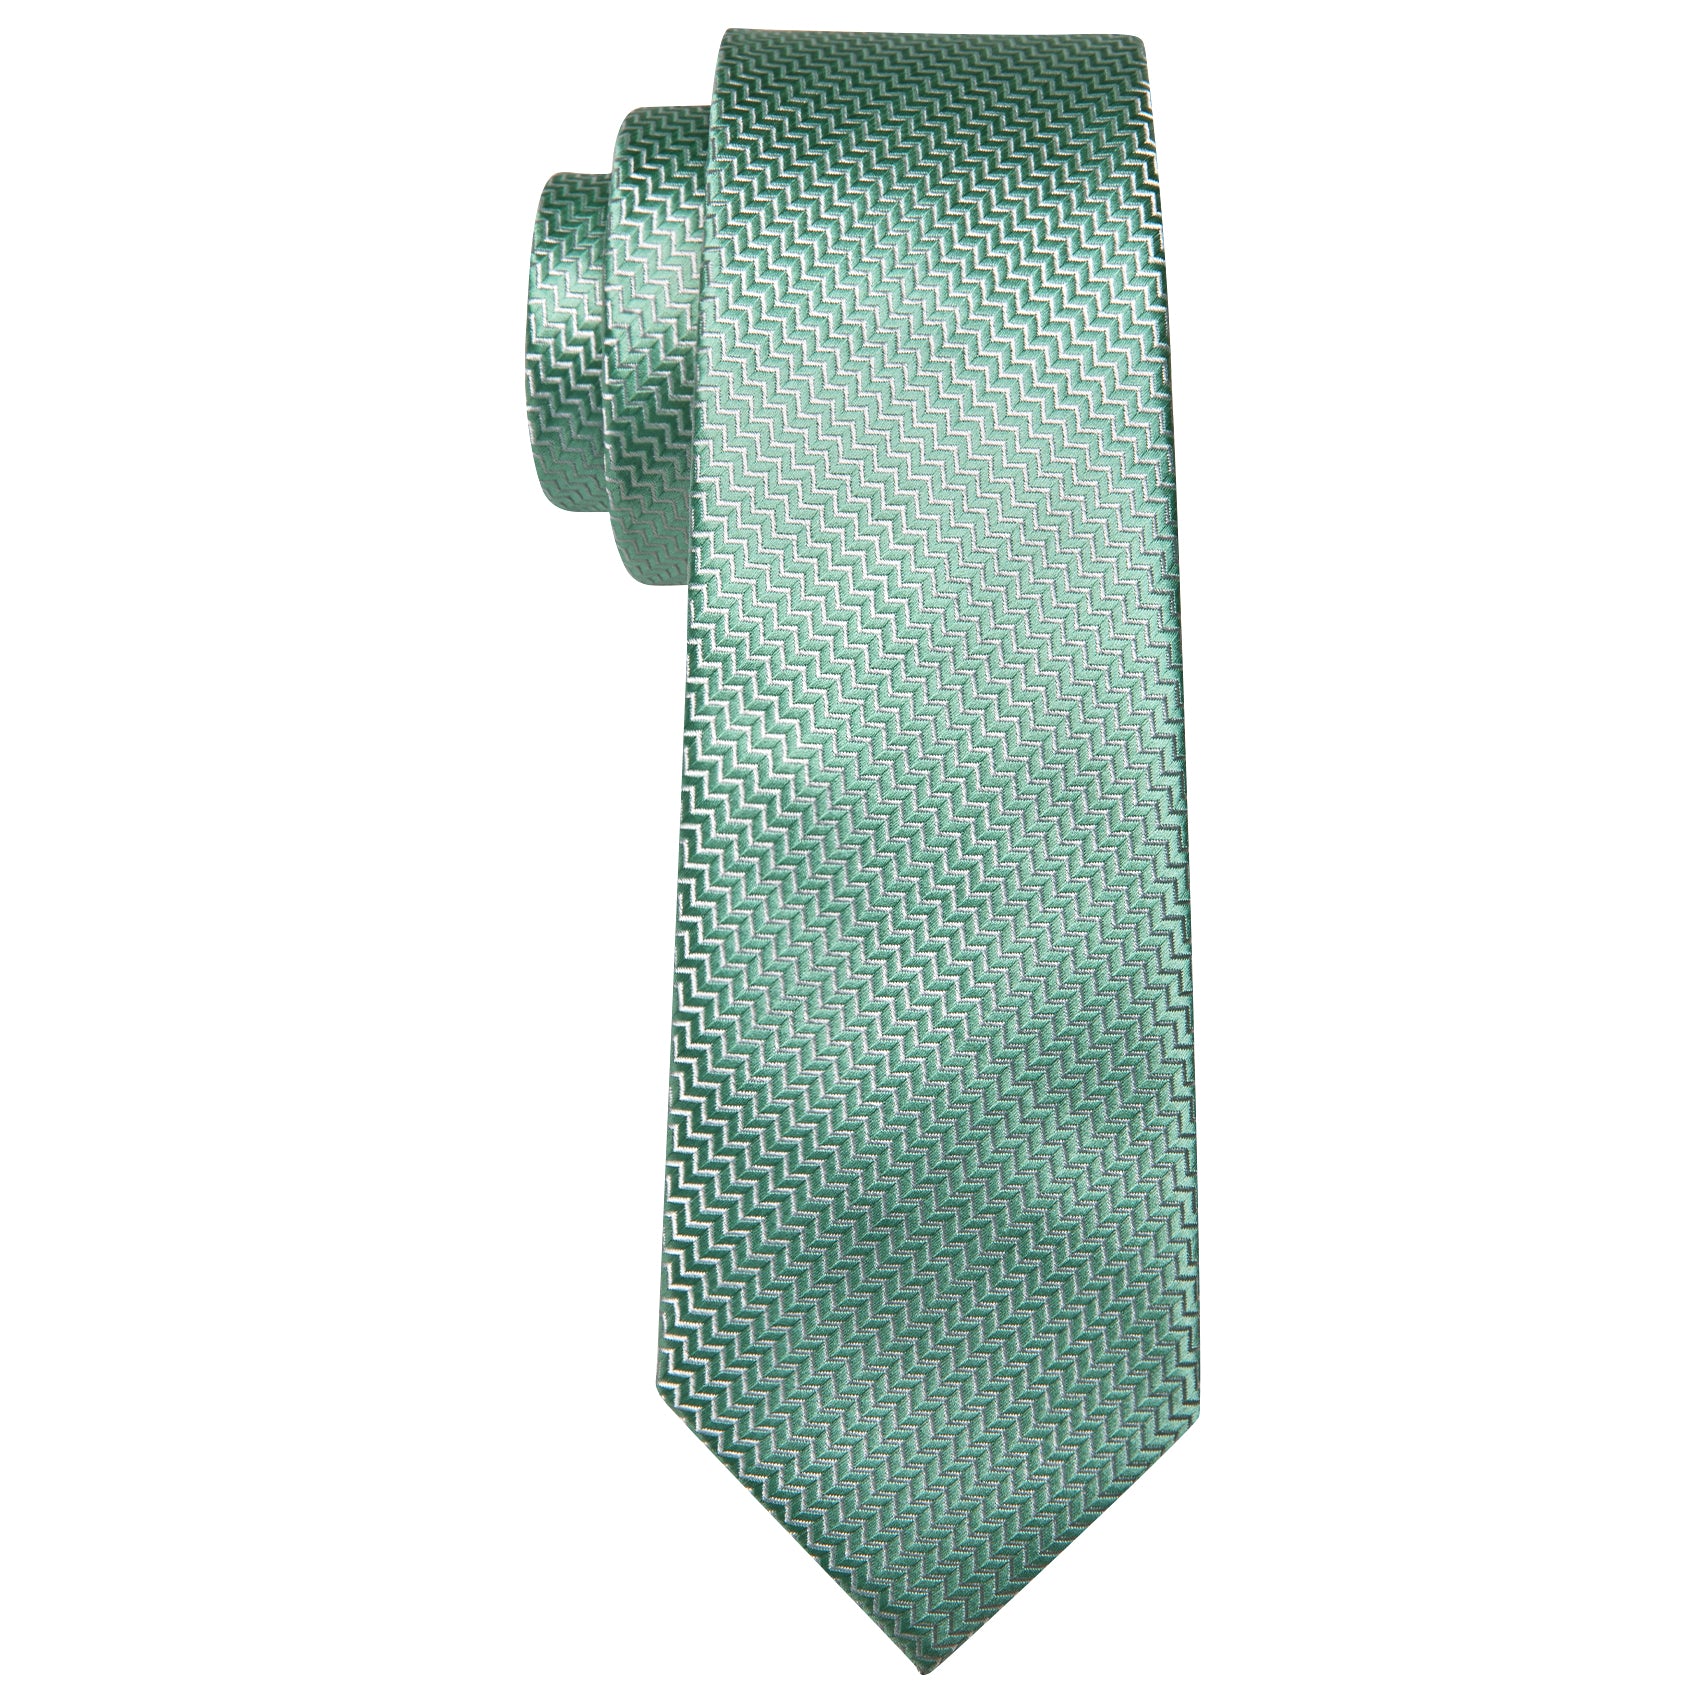 Turquoise Green Ripple Silk 63 Inches Extra Long Tie Hanky Cufflinks Set